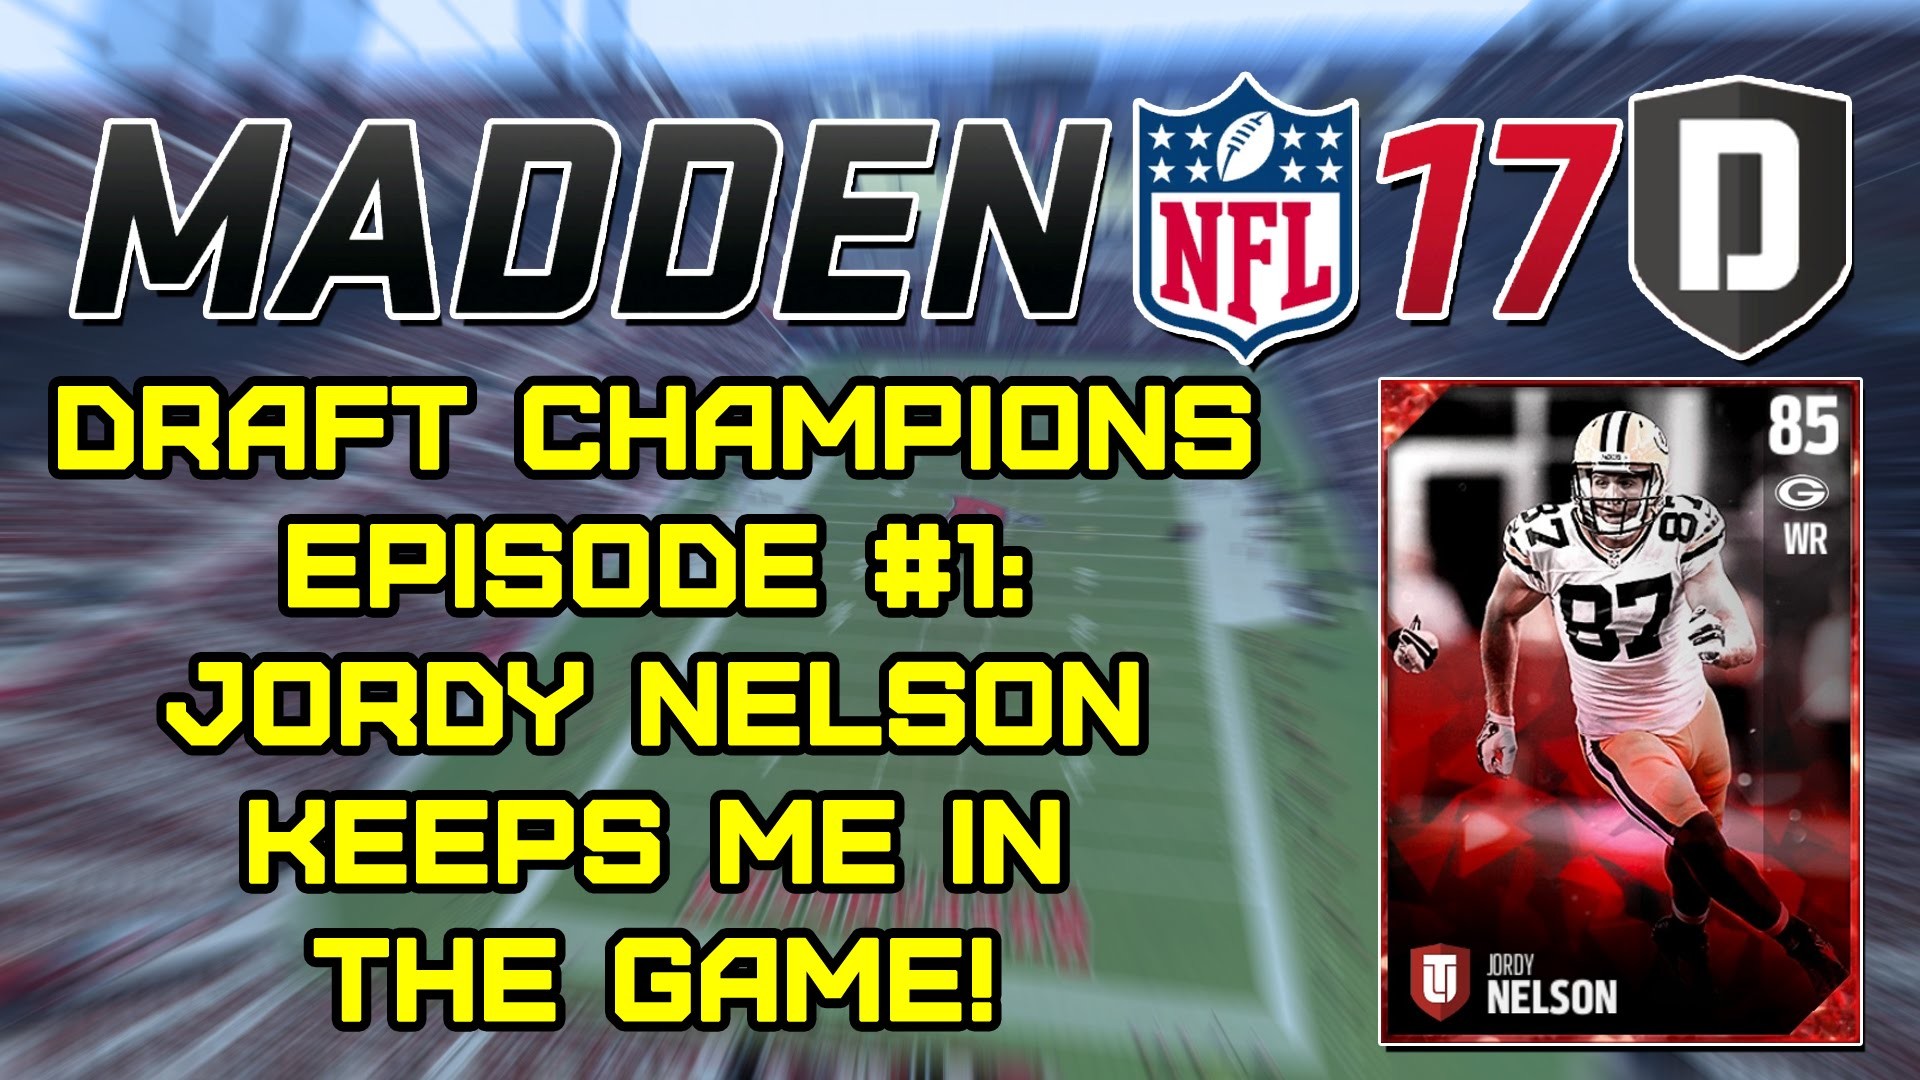 1920x1080 Jordy Nelson Keeps Me in the Game! - Madden 17 Draft Champions Ep. #1